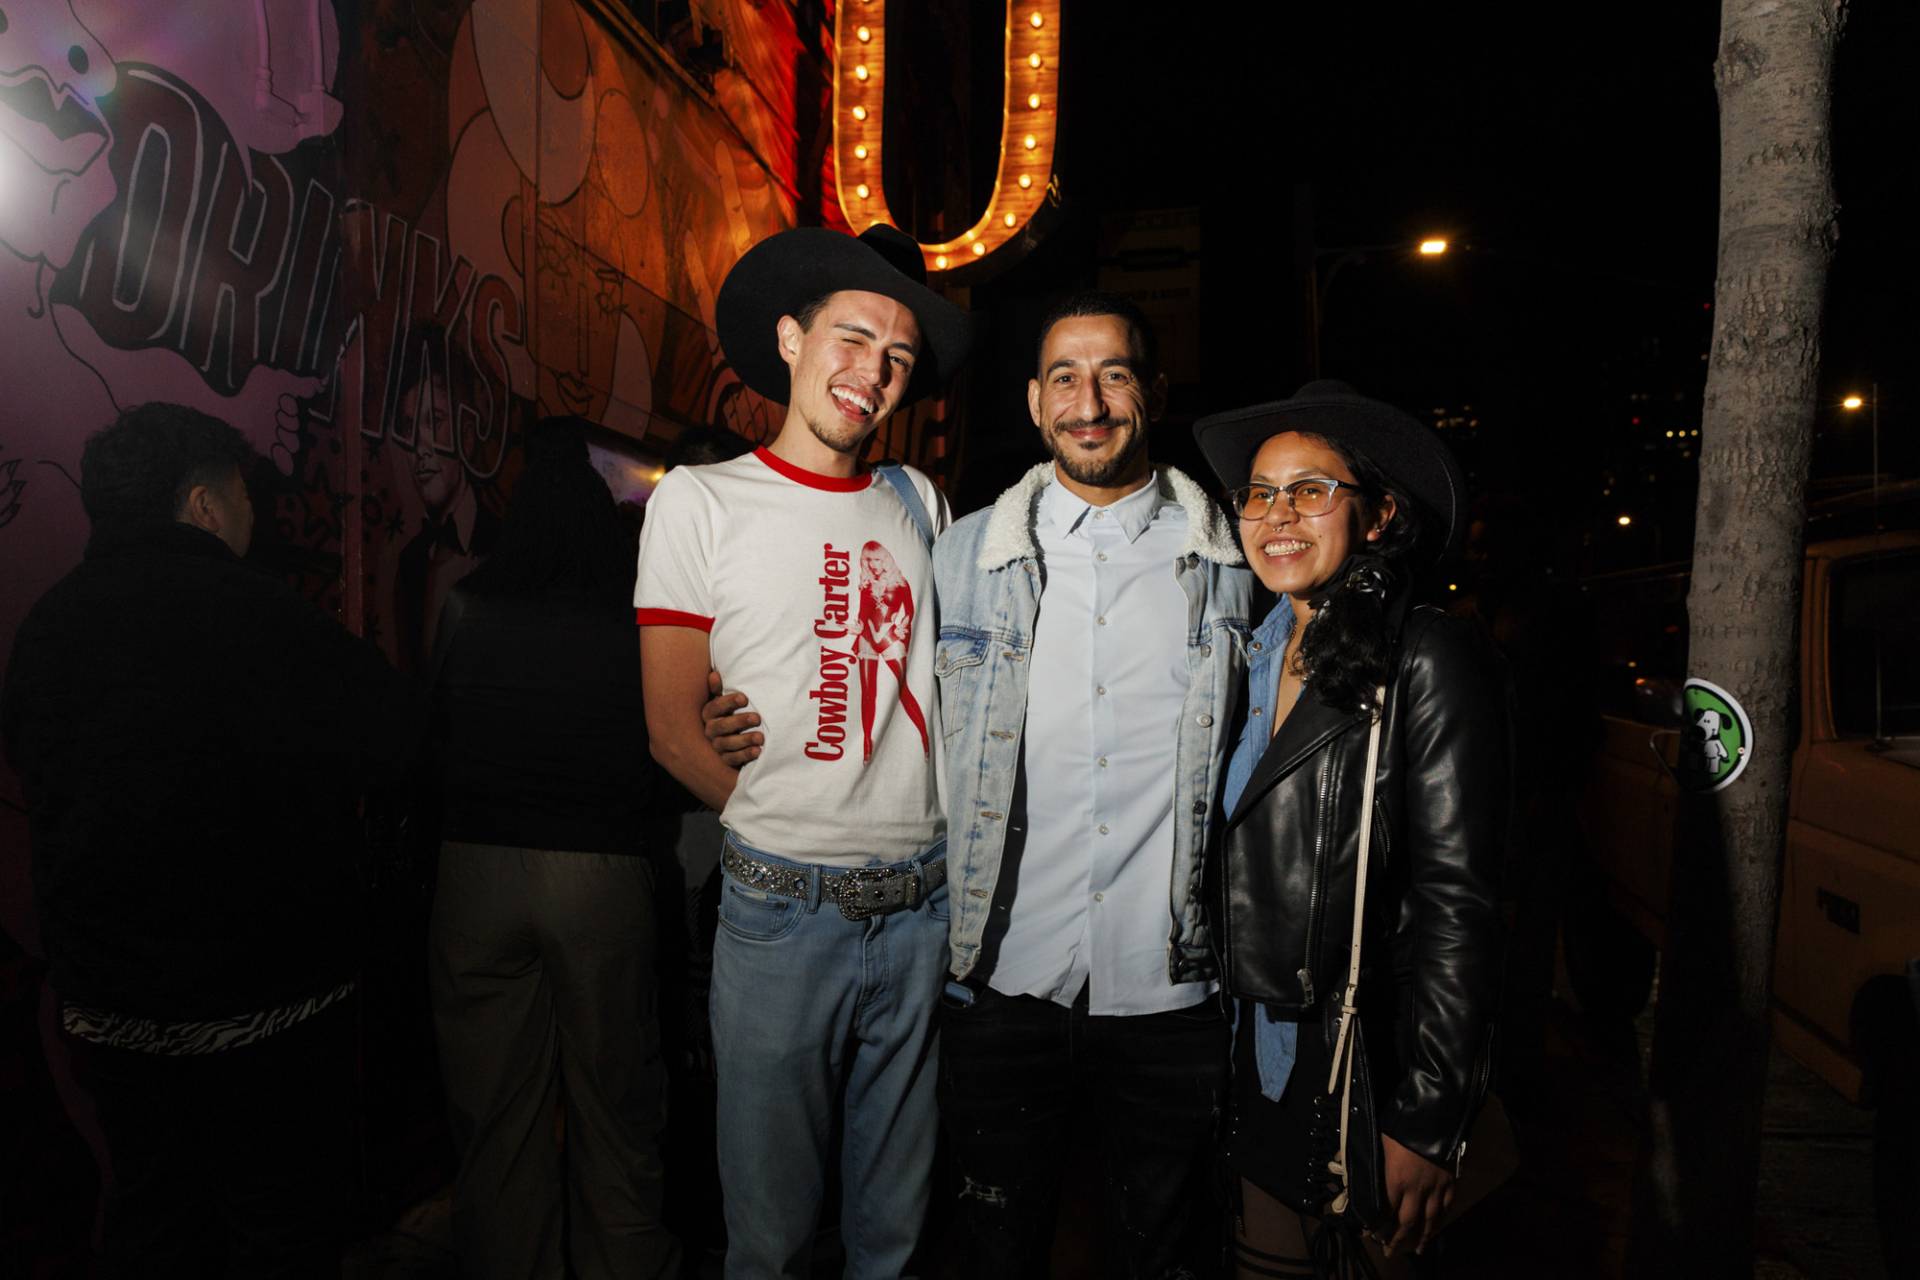 A slender white man in a Beyonce t-shirt, an Arabic man wearing a blue shirt and an Asian woman in a black leather jacket stand with arms around each other outside a nightclub.